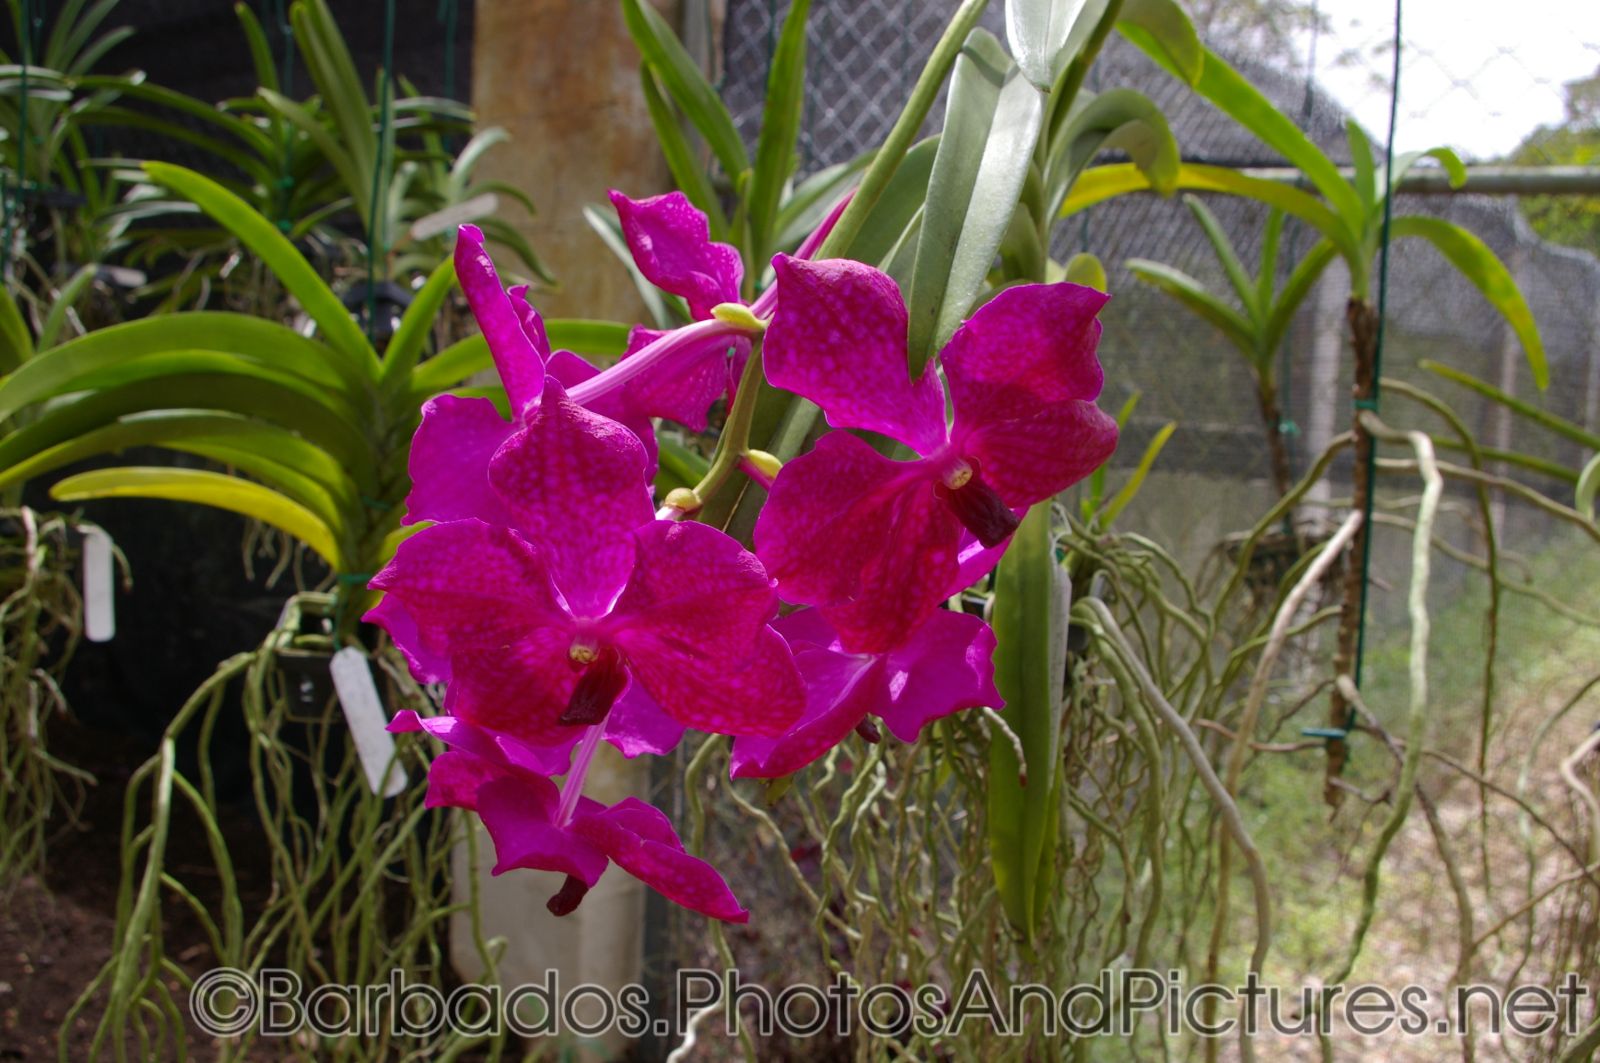 Magenta orchid with spots at Orchid World in Barbados.jpg
